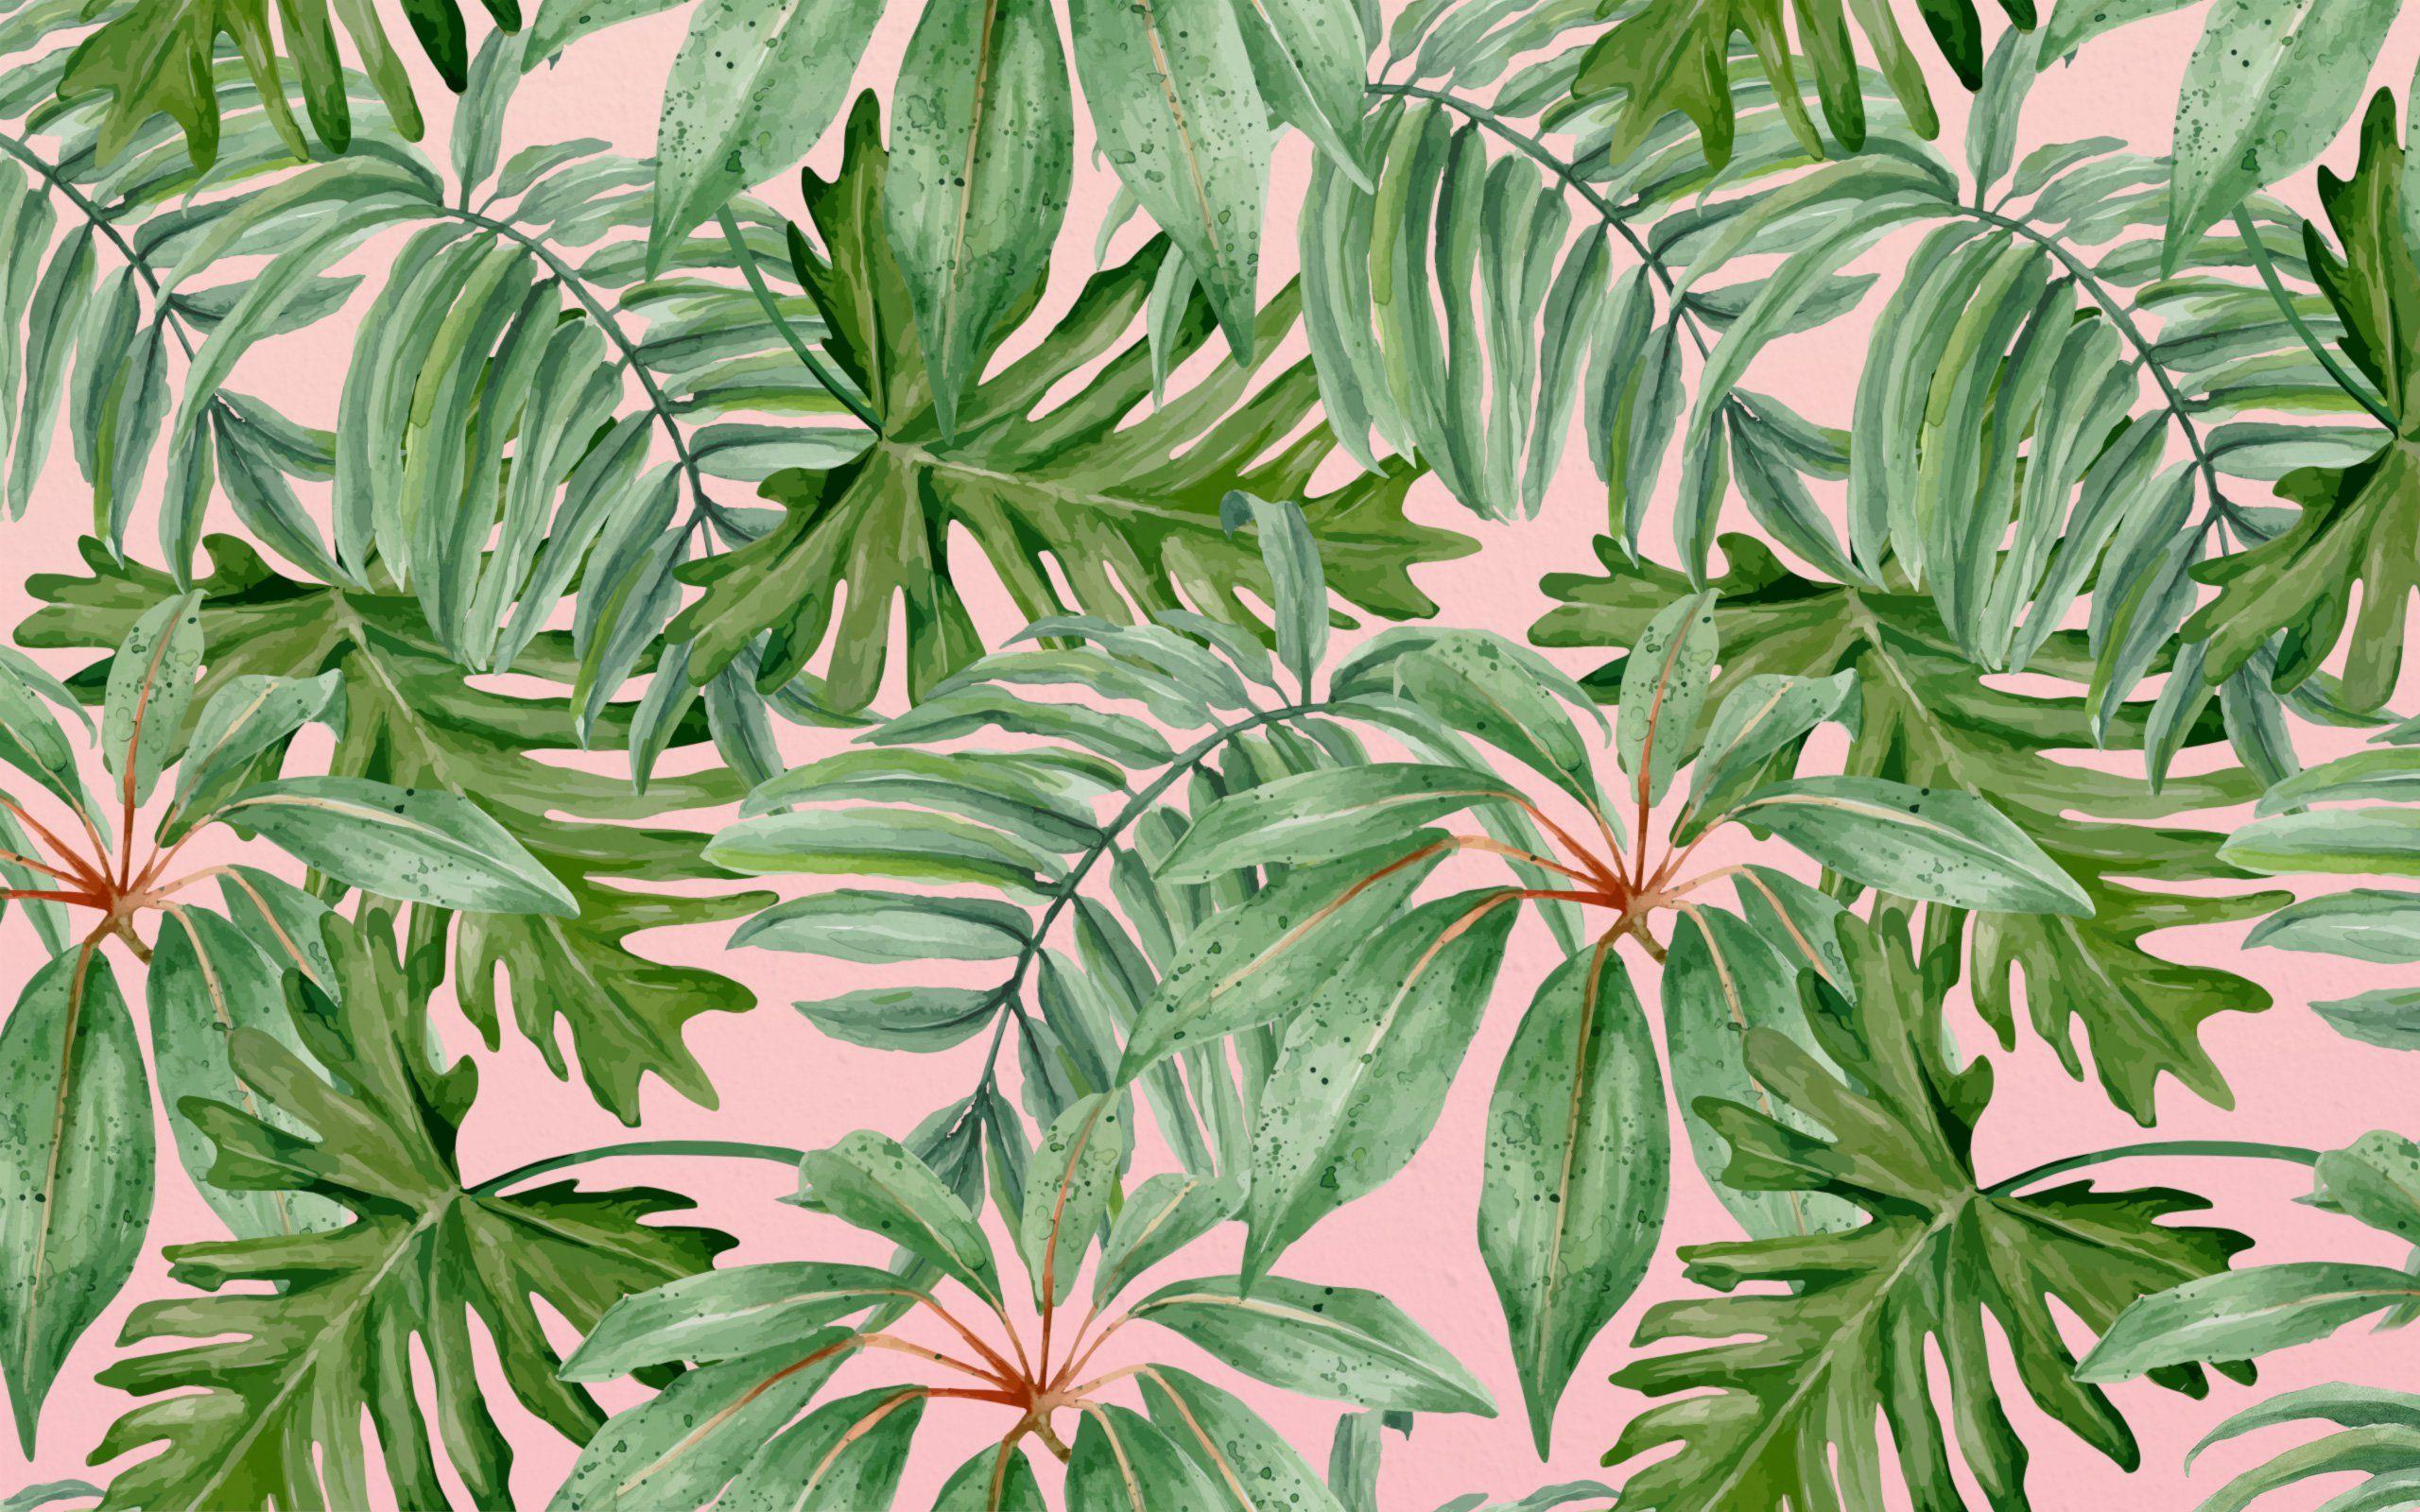 Aesthetic Leaves Wallpaper Pink - Find the large collection of 33000